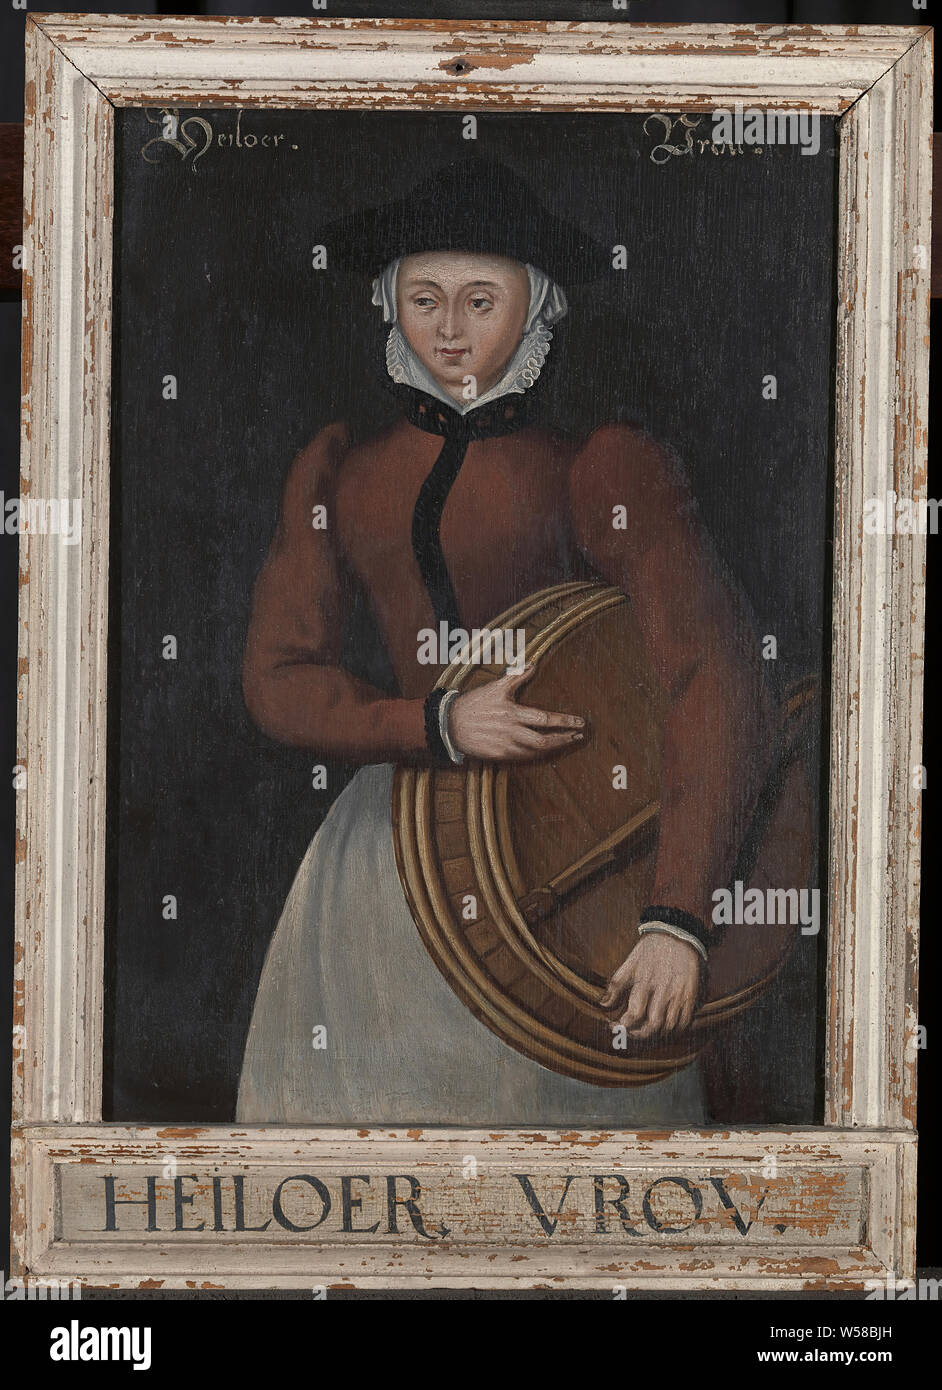 Heiloer Vrou, Old painting of a lady holding a wooden washbasin under her arm, Picture frame, h 52.5 cm × w 37.2 cm × d 2.9 cm h 42.2 cm × w 30.2 cm, ca. 16th century, oil on panel Stock Photo